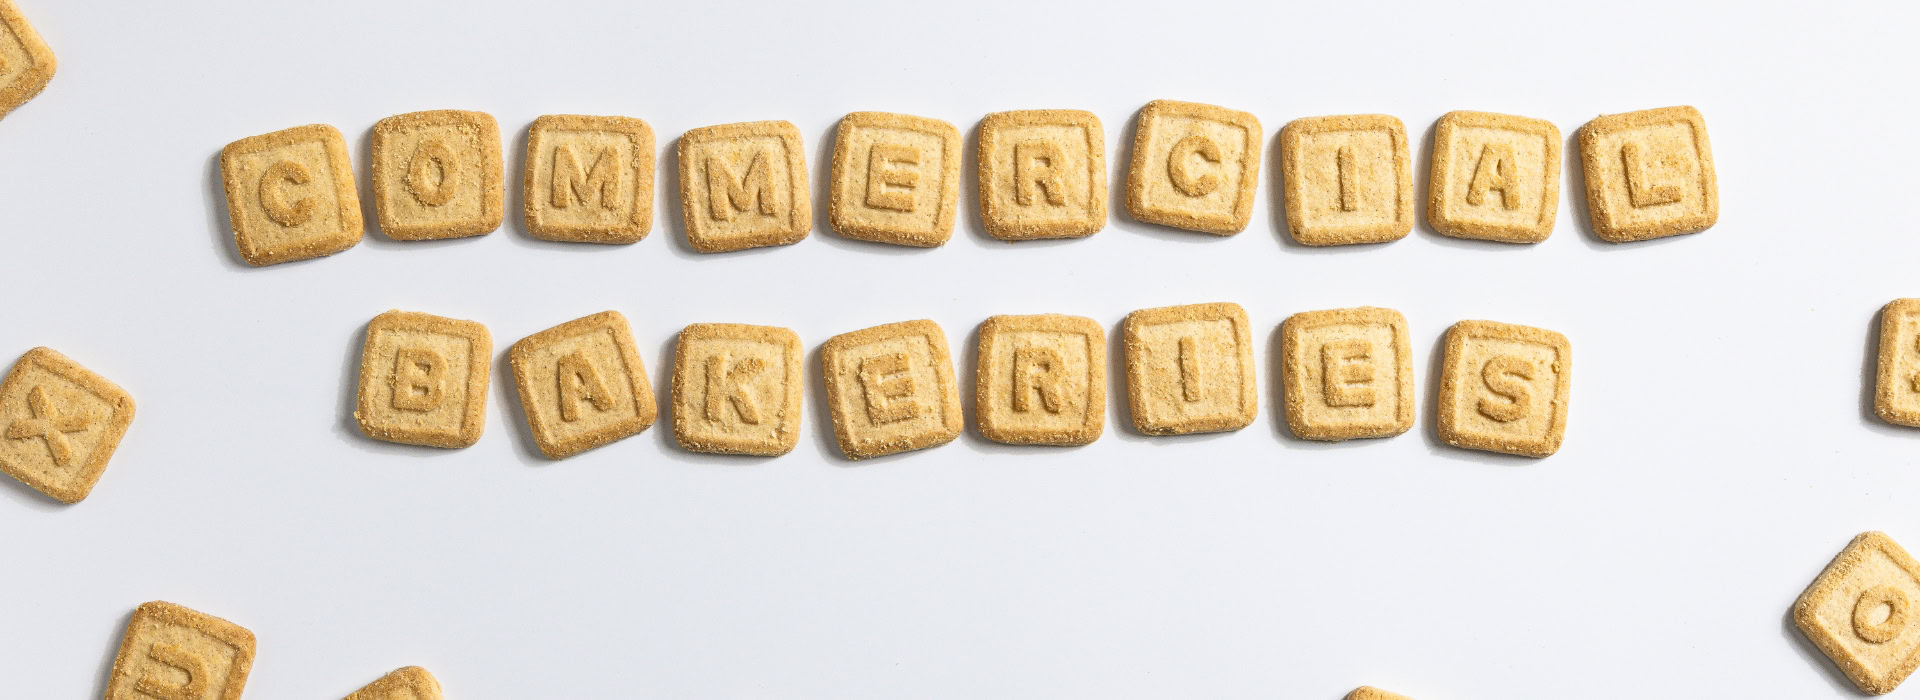 Commercial Bakeries letter rotary cookies